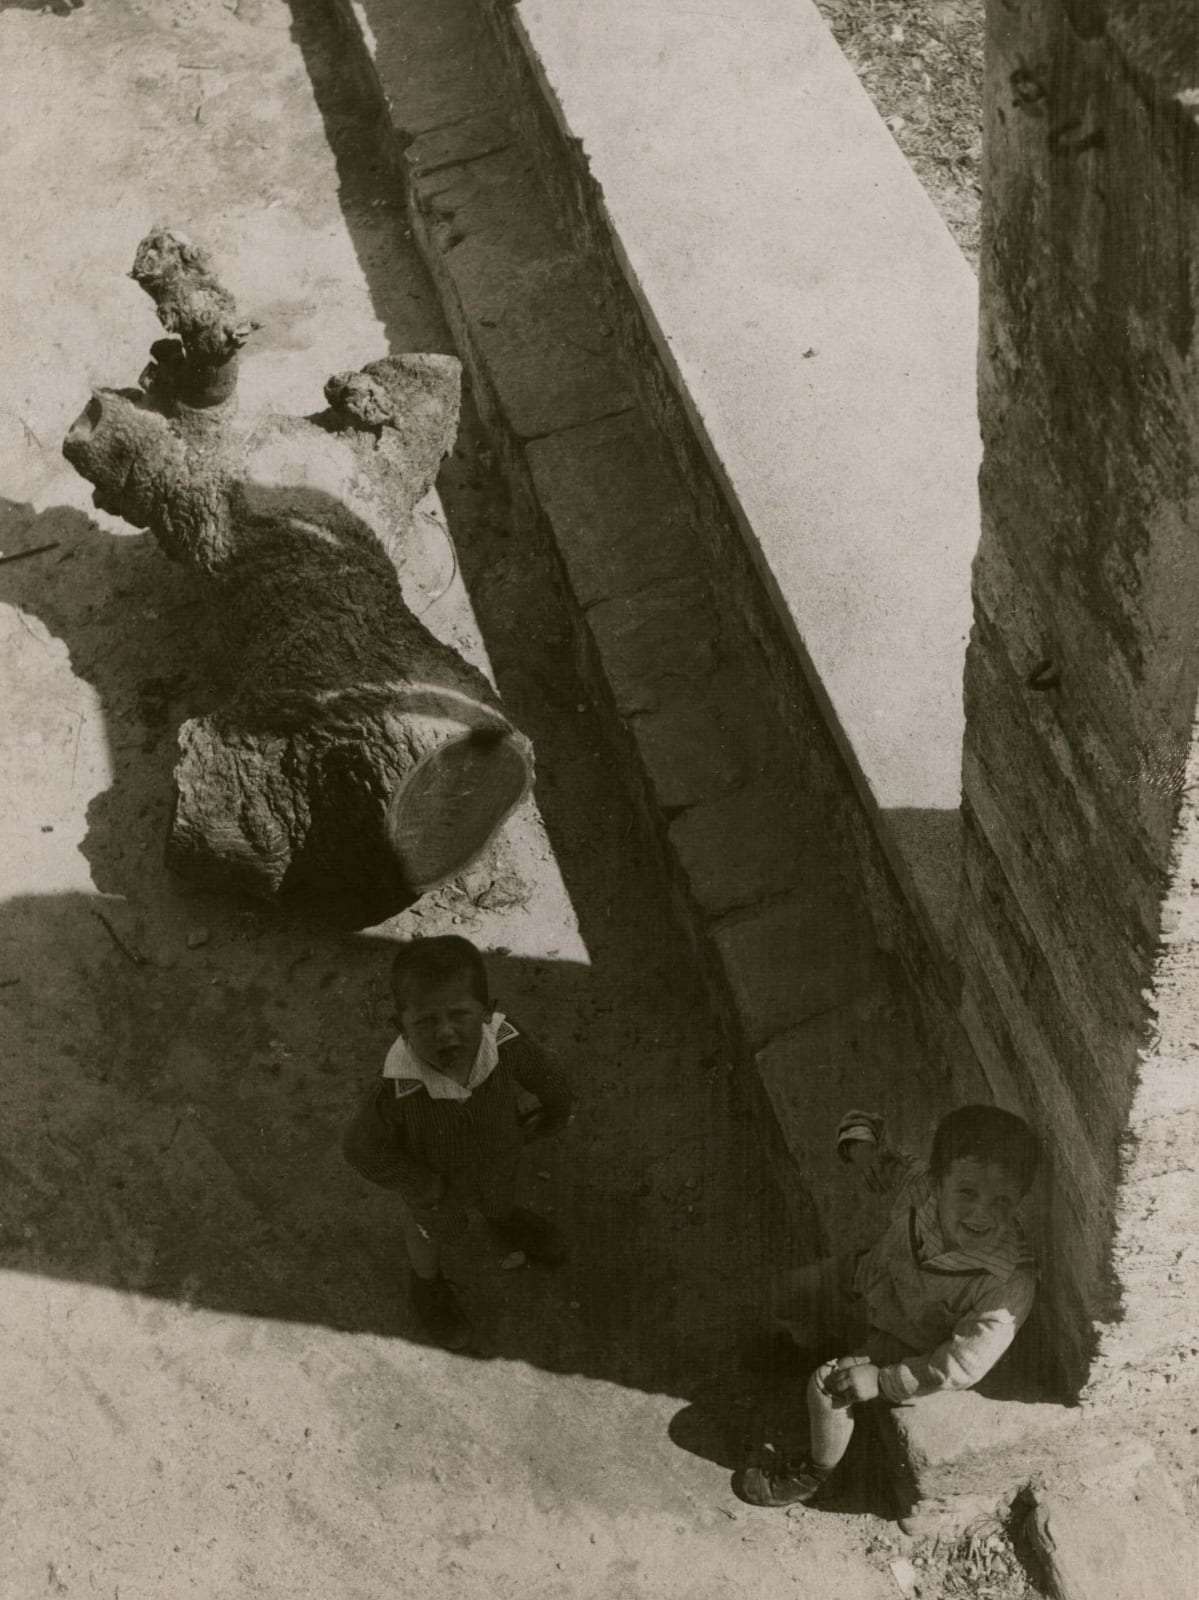 Laszlo Moholy-Nagy Kinder in Ascona two children sitting on dusty road next to cut tree trunk and brick column